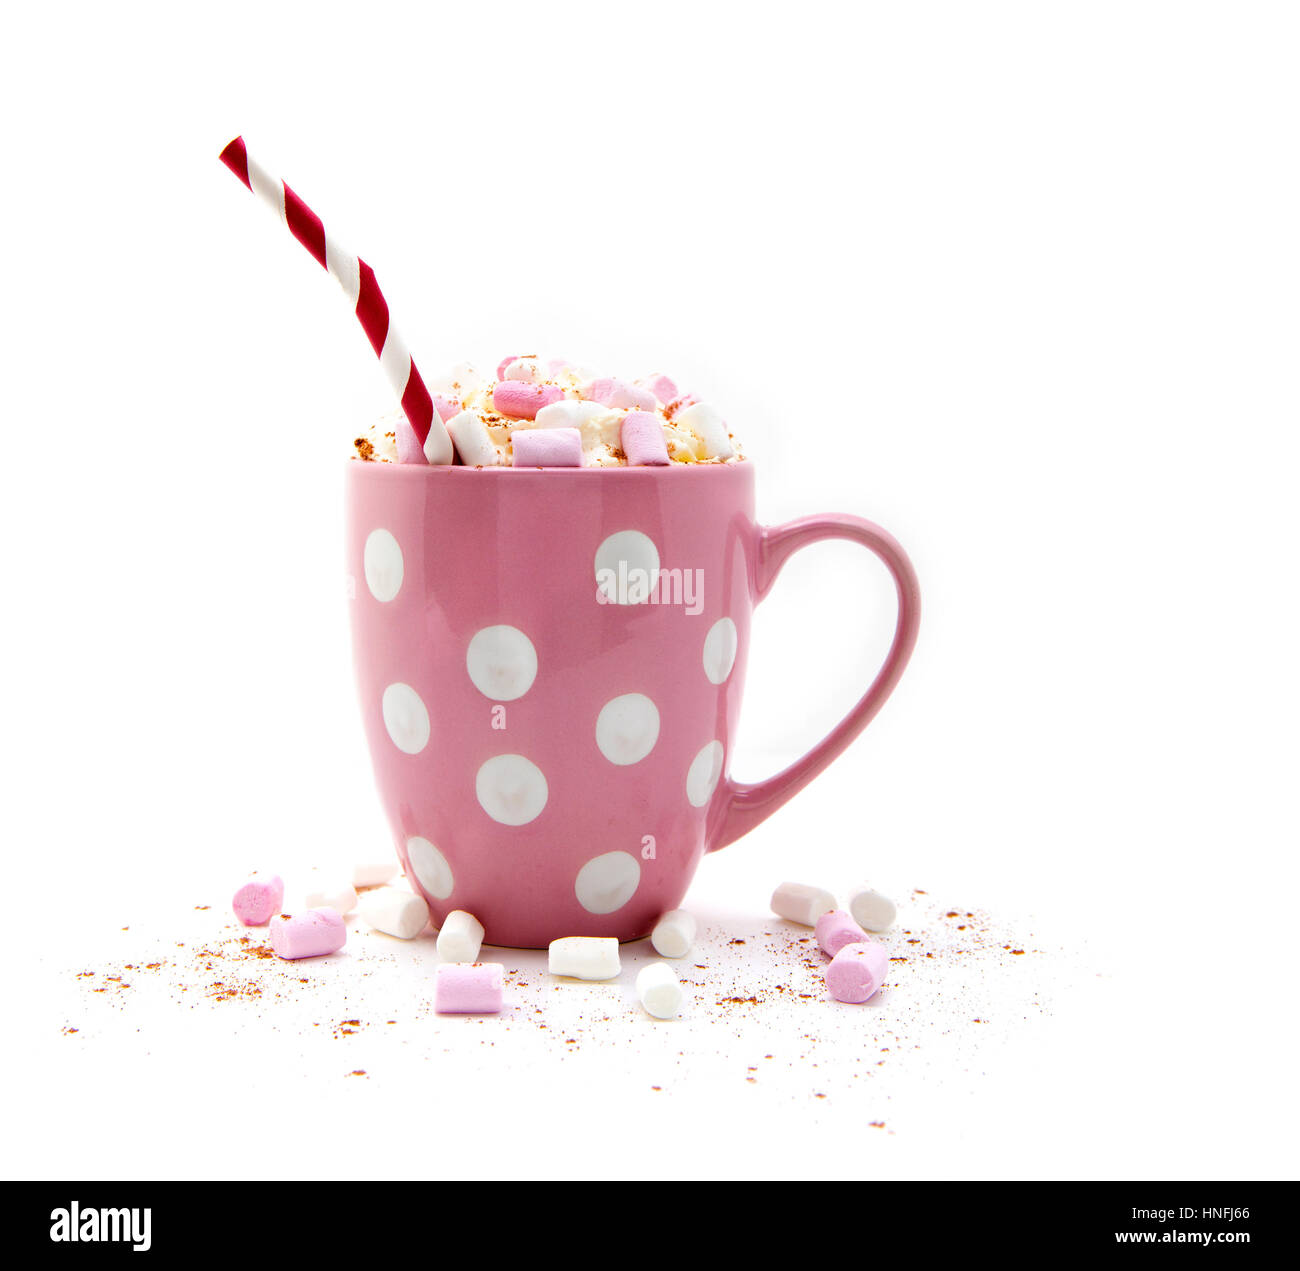 Hot Chocolate in a pink mug with marshmallows and a red and white striped straw on a white background Stock Photo